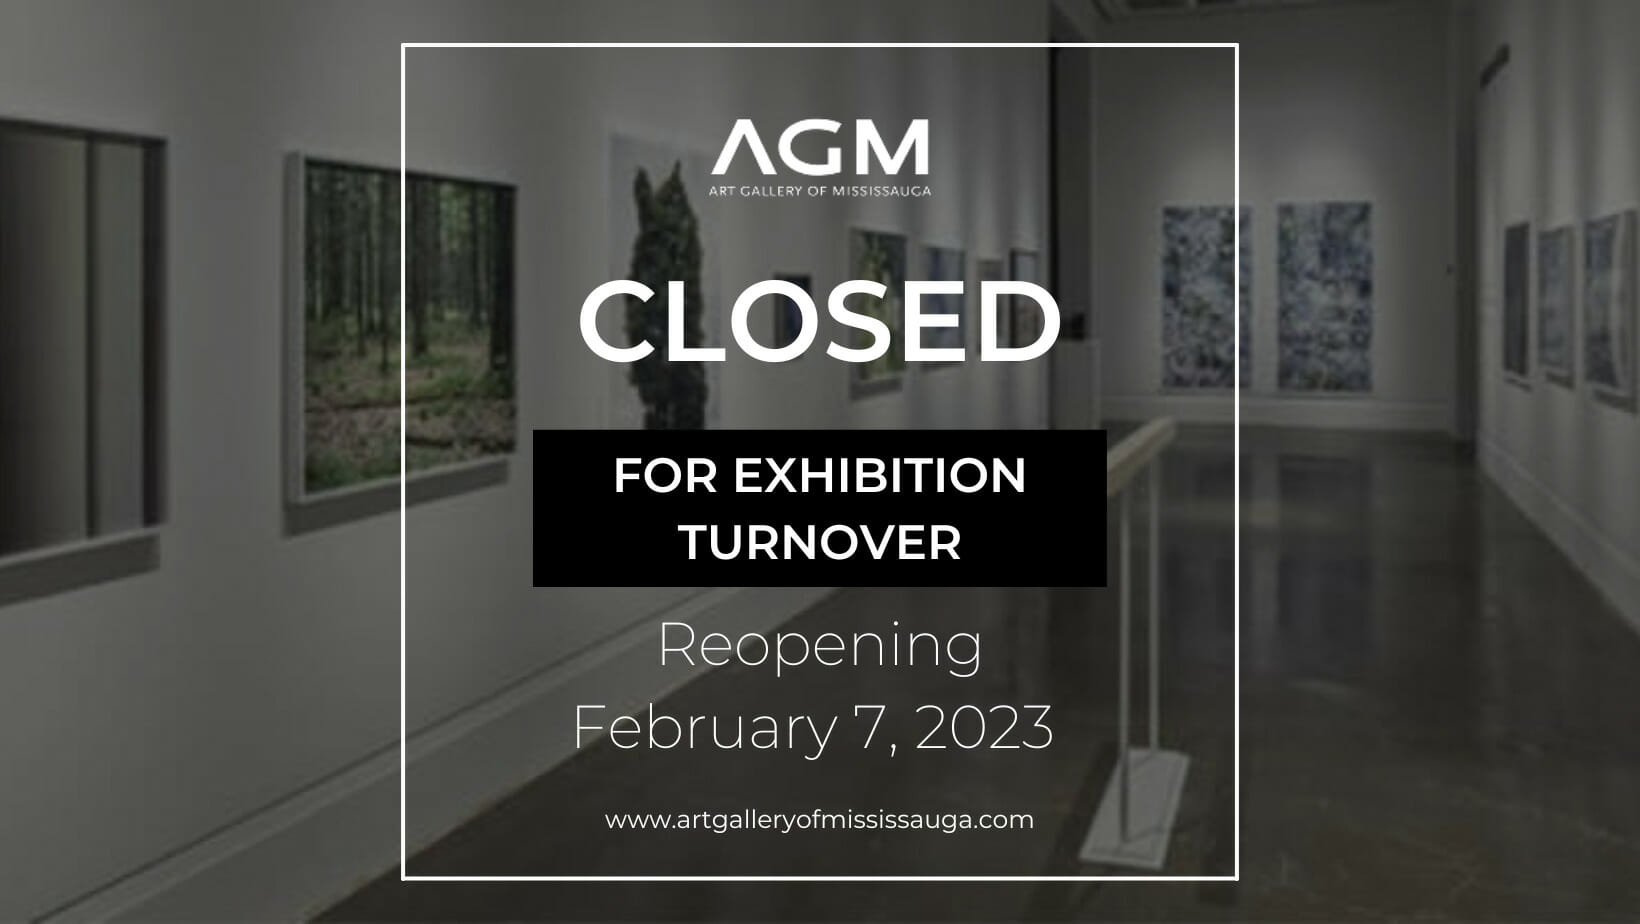 Exhibition Turnover to Feb 7